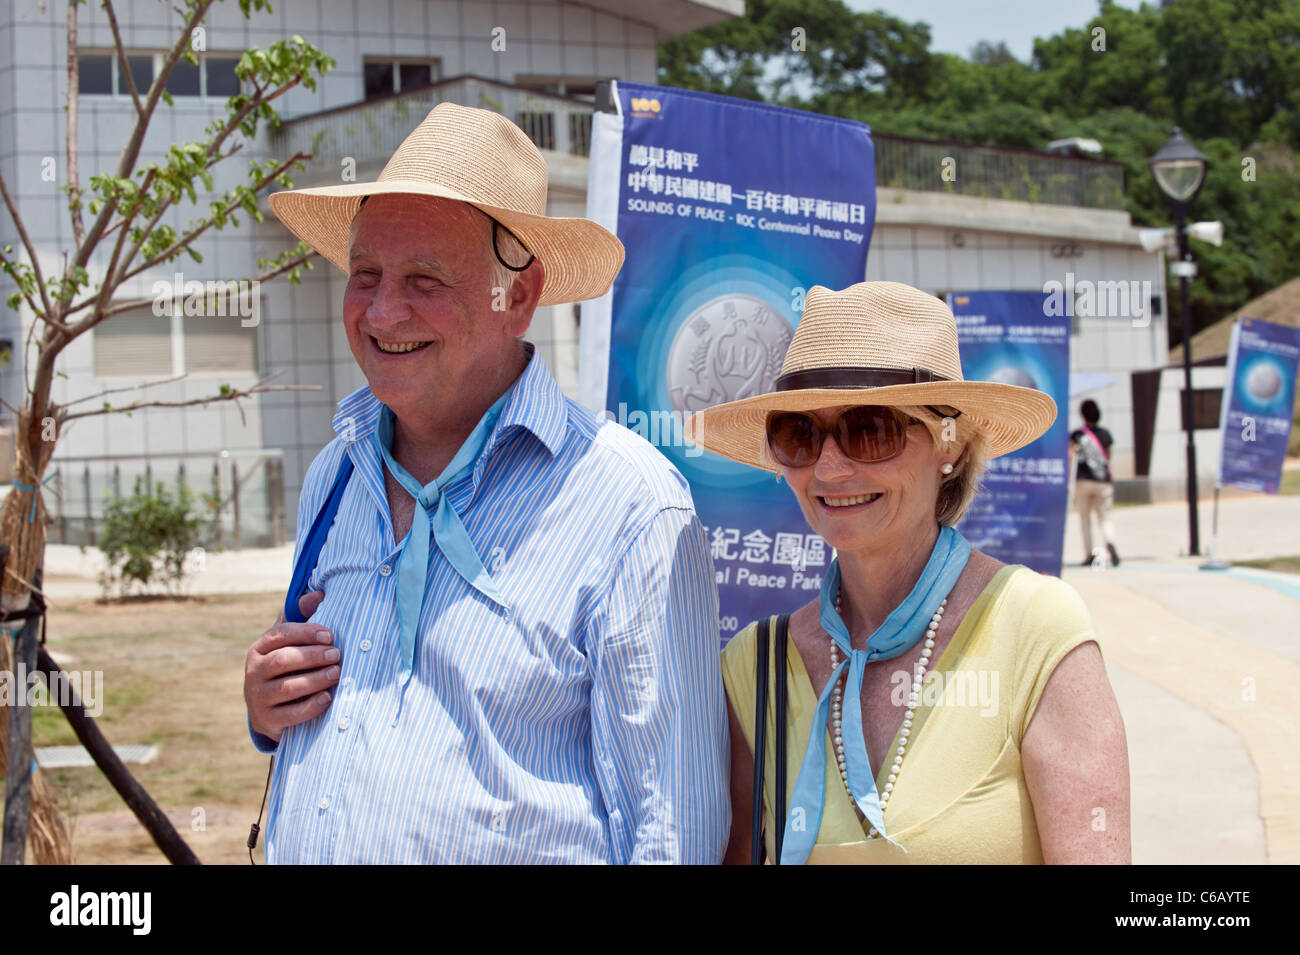 FW DeKlerk, Nobel Peace Prize Laureate and former South African President at the ROC Centennial Peace Day, Kinmen Island, Taiwan Stock Photo